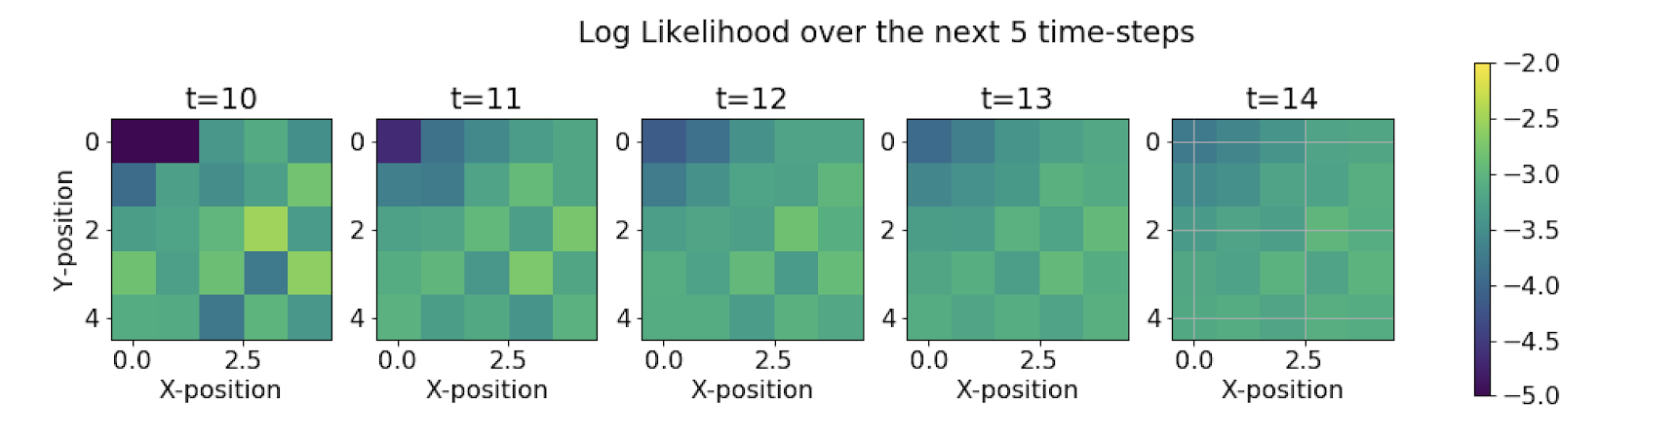 Prediction log-likelihood probabilities at the next 5 time steps using all evidence